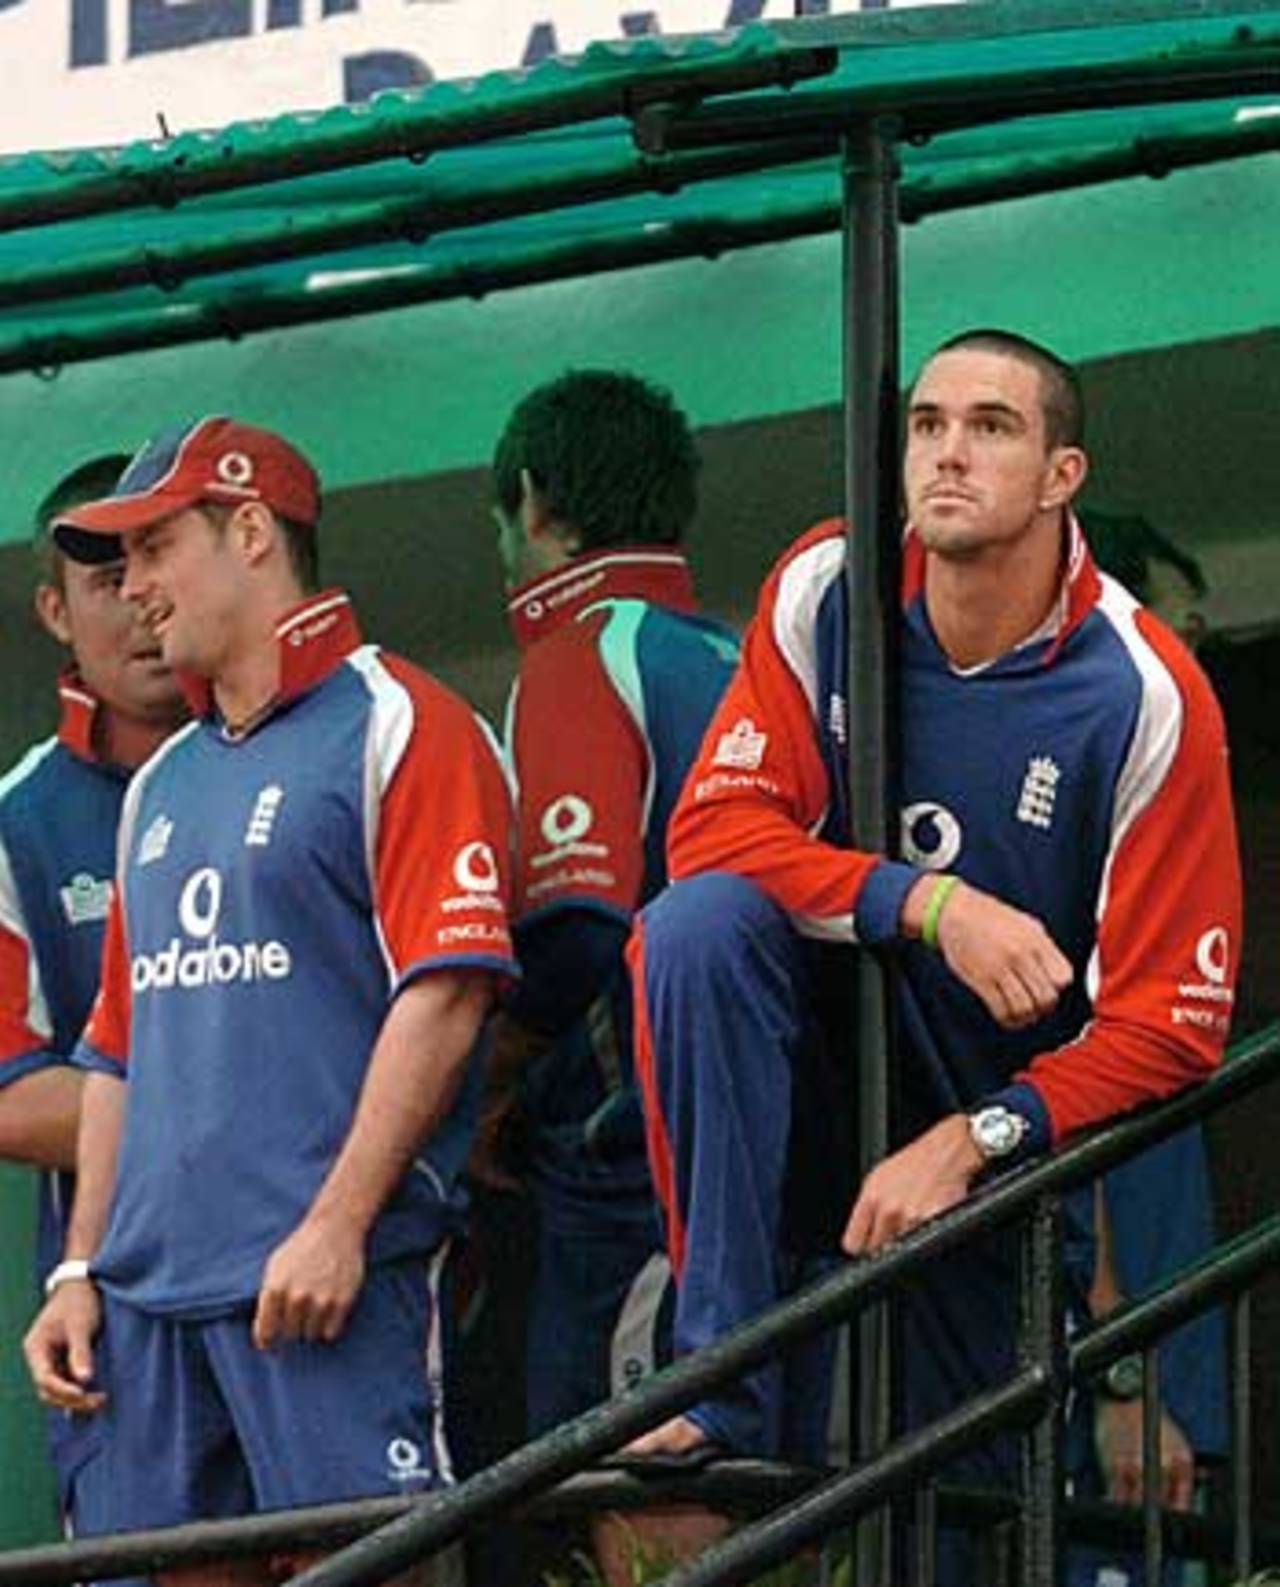 Kevin Pietersen strikes a contemplative pose as the rain continued to fall at Guwahati ahead of the fifth one-dayer, India v England, April 8, 2006